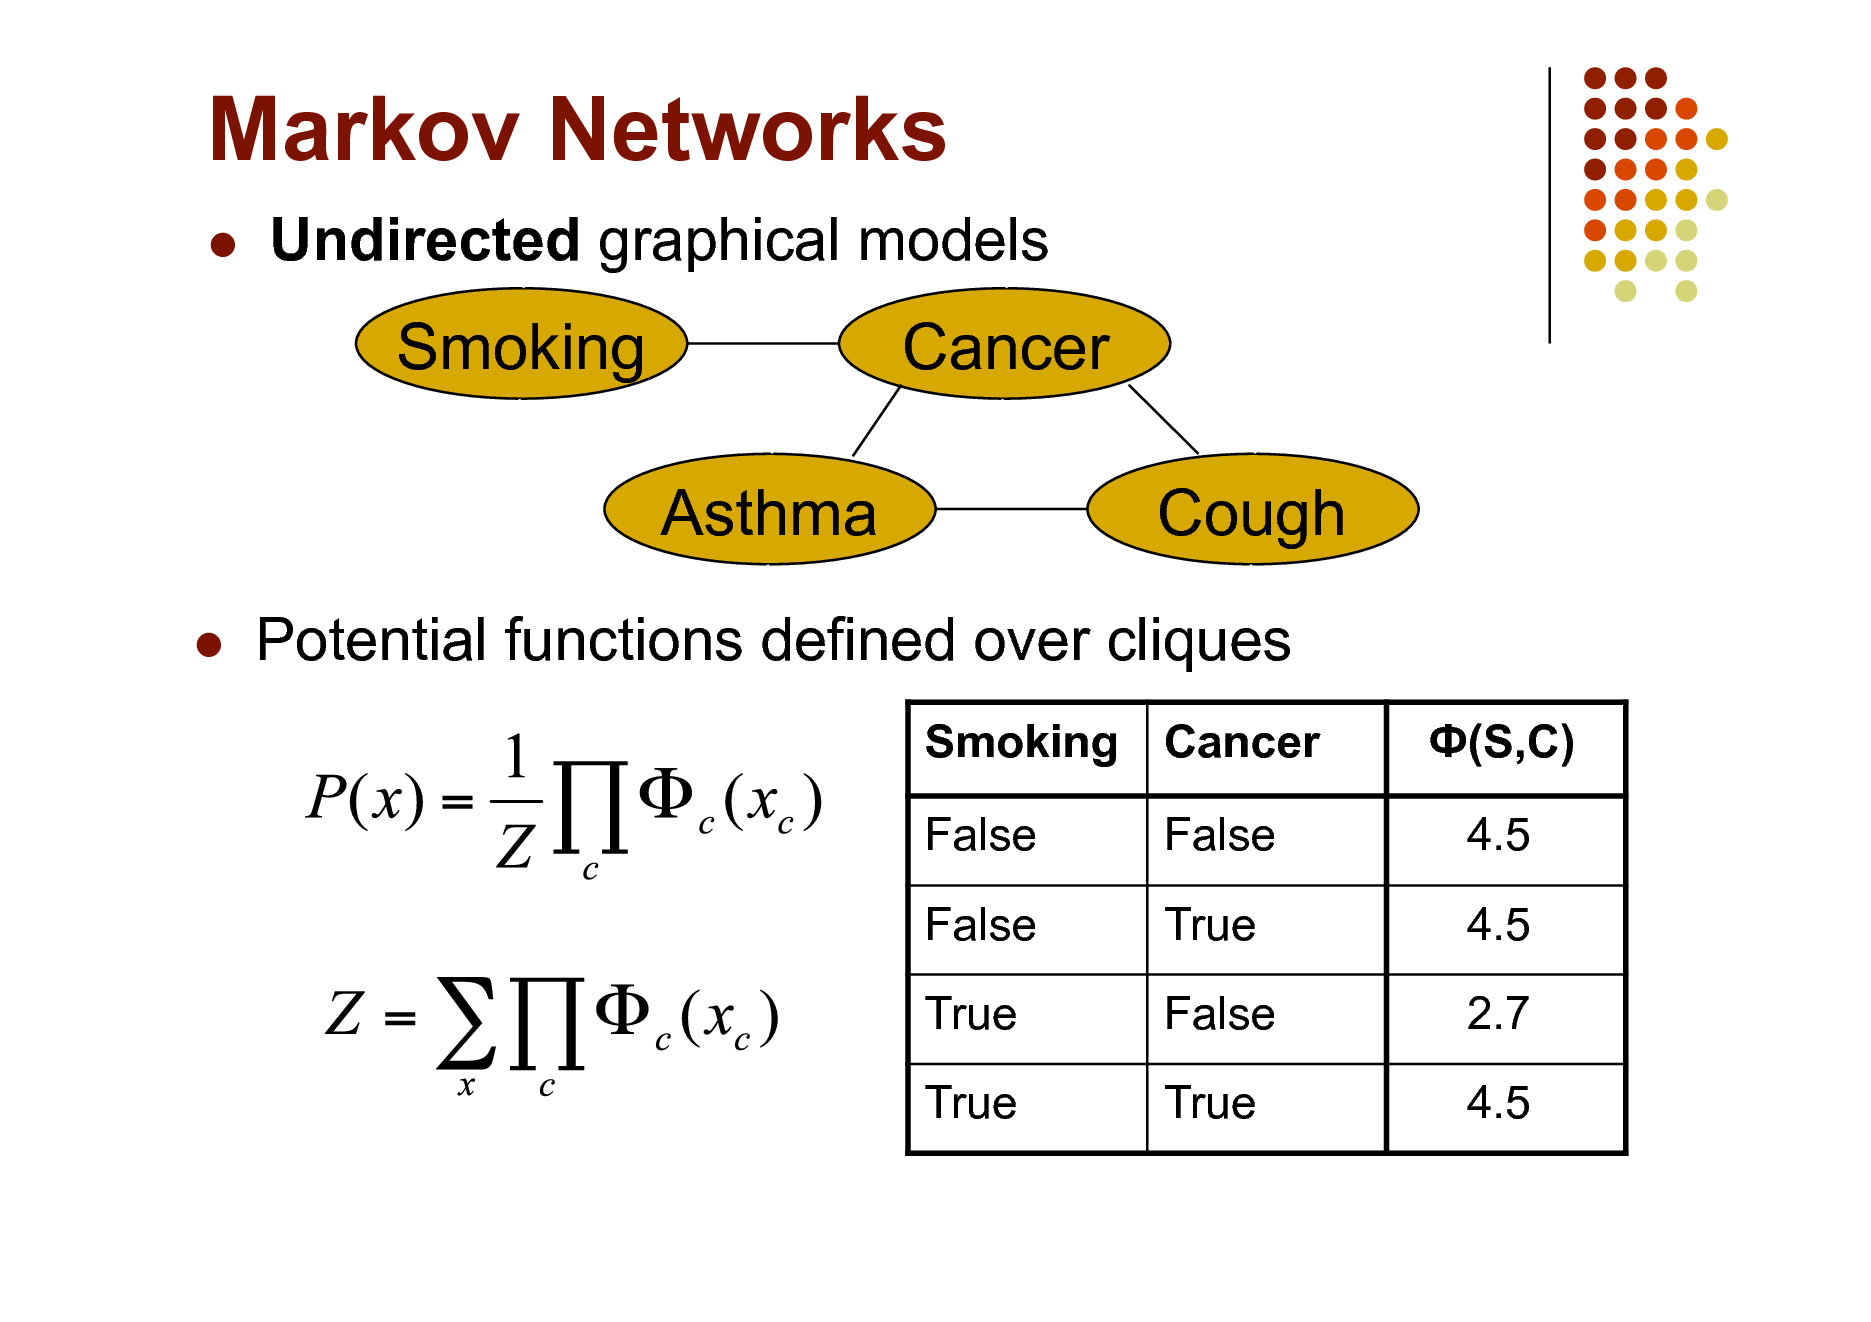 Slide: Markov Networks


Undirected graphical models

Smoking Asthma


Cancer Cough

Potential functions defined over cliques
Smoking Cancer False False True True False True False True (S,C) 4.5 4.5 2.7 4.5

